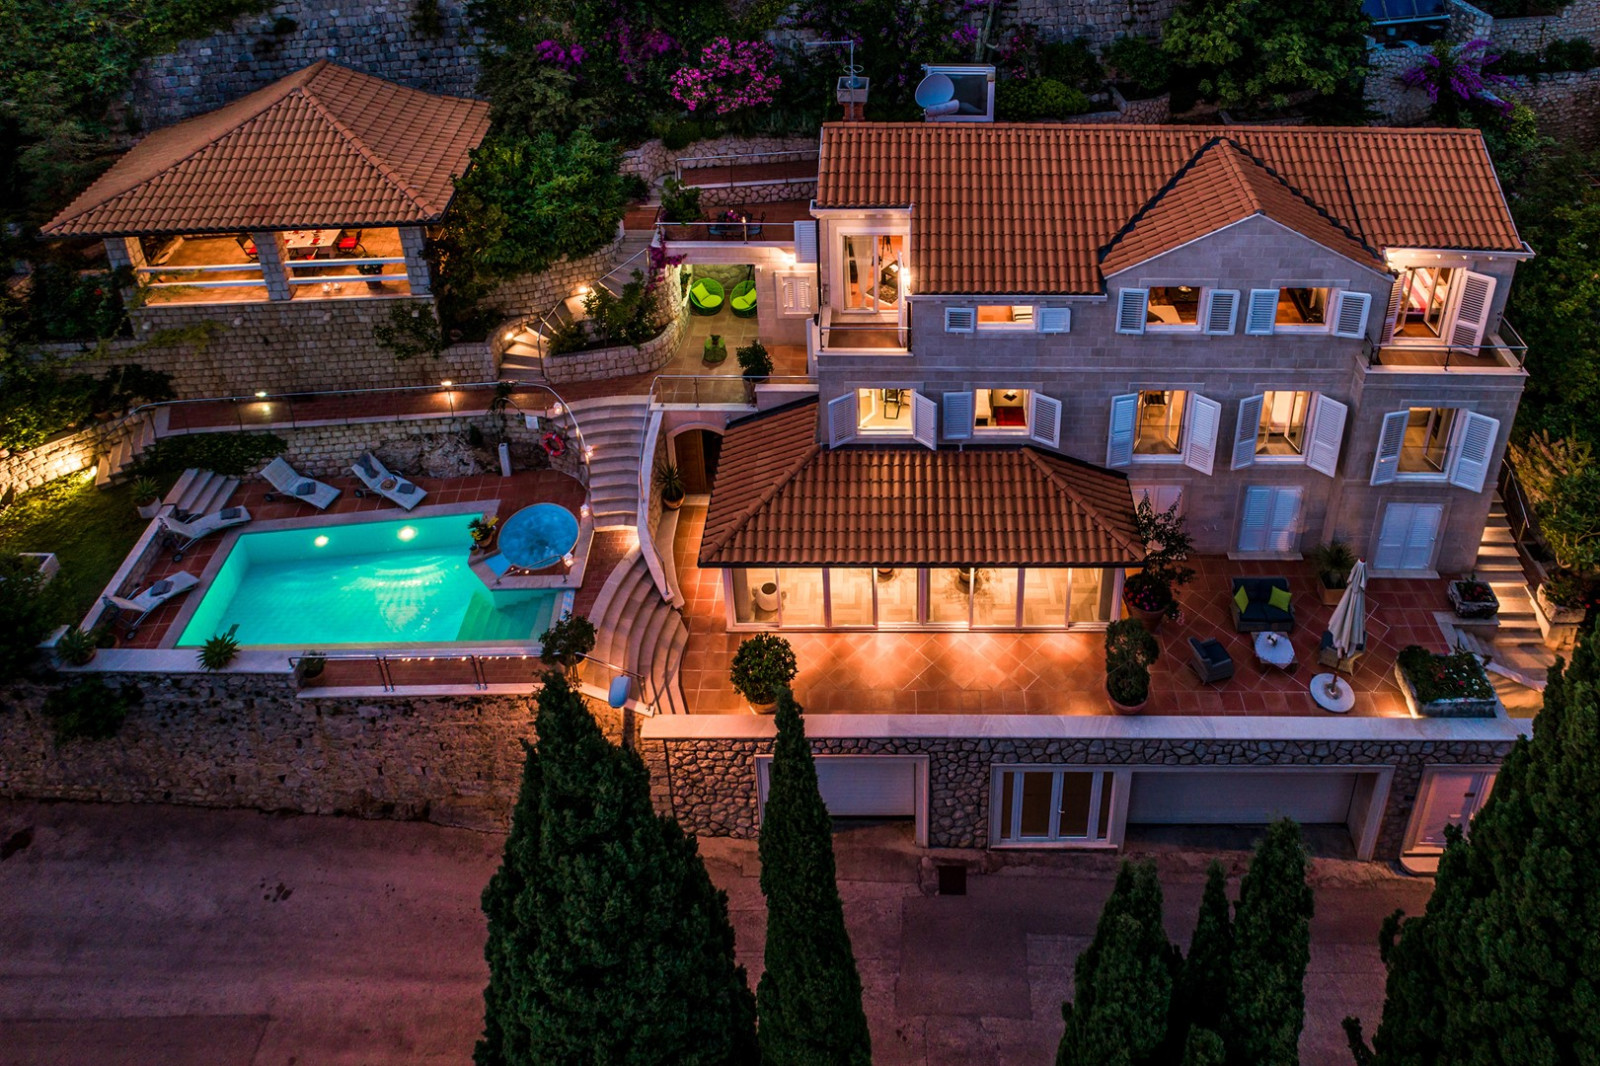 DUBROVNIK LUXURY VILLAS - Luxury Villa Dubrovnik Palace with the pool and jacuzzi near the sea in Dubrovnik